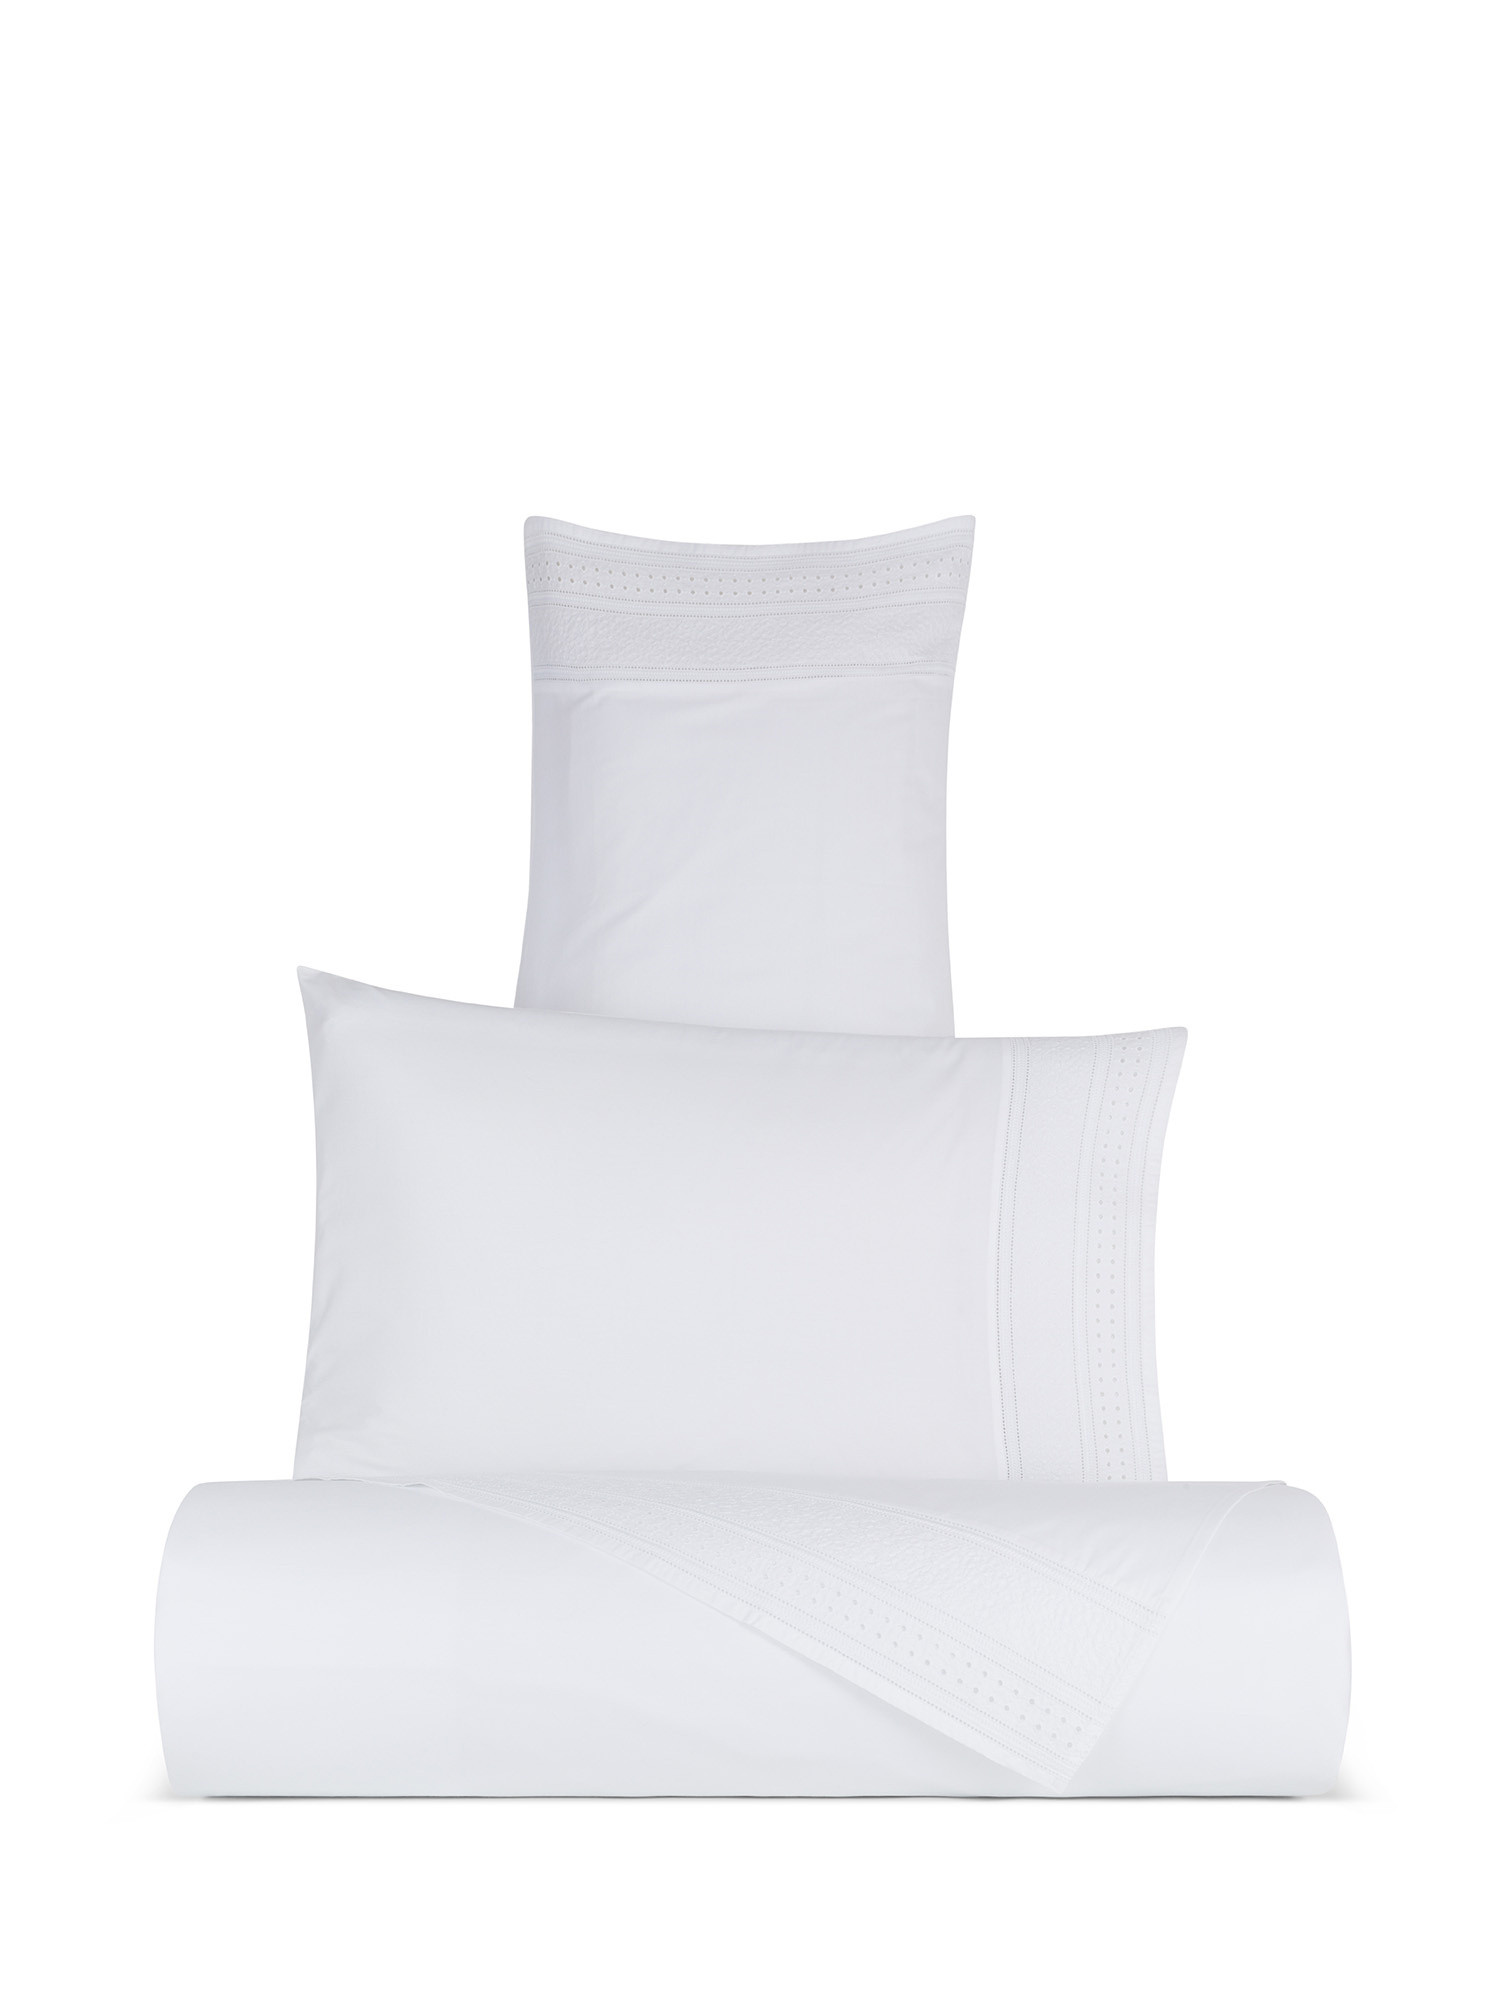 Flat sheet in fine percale cotton Portofino, White, large image number 0